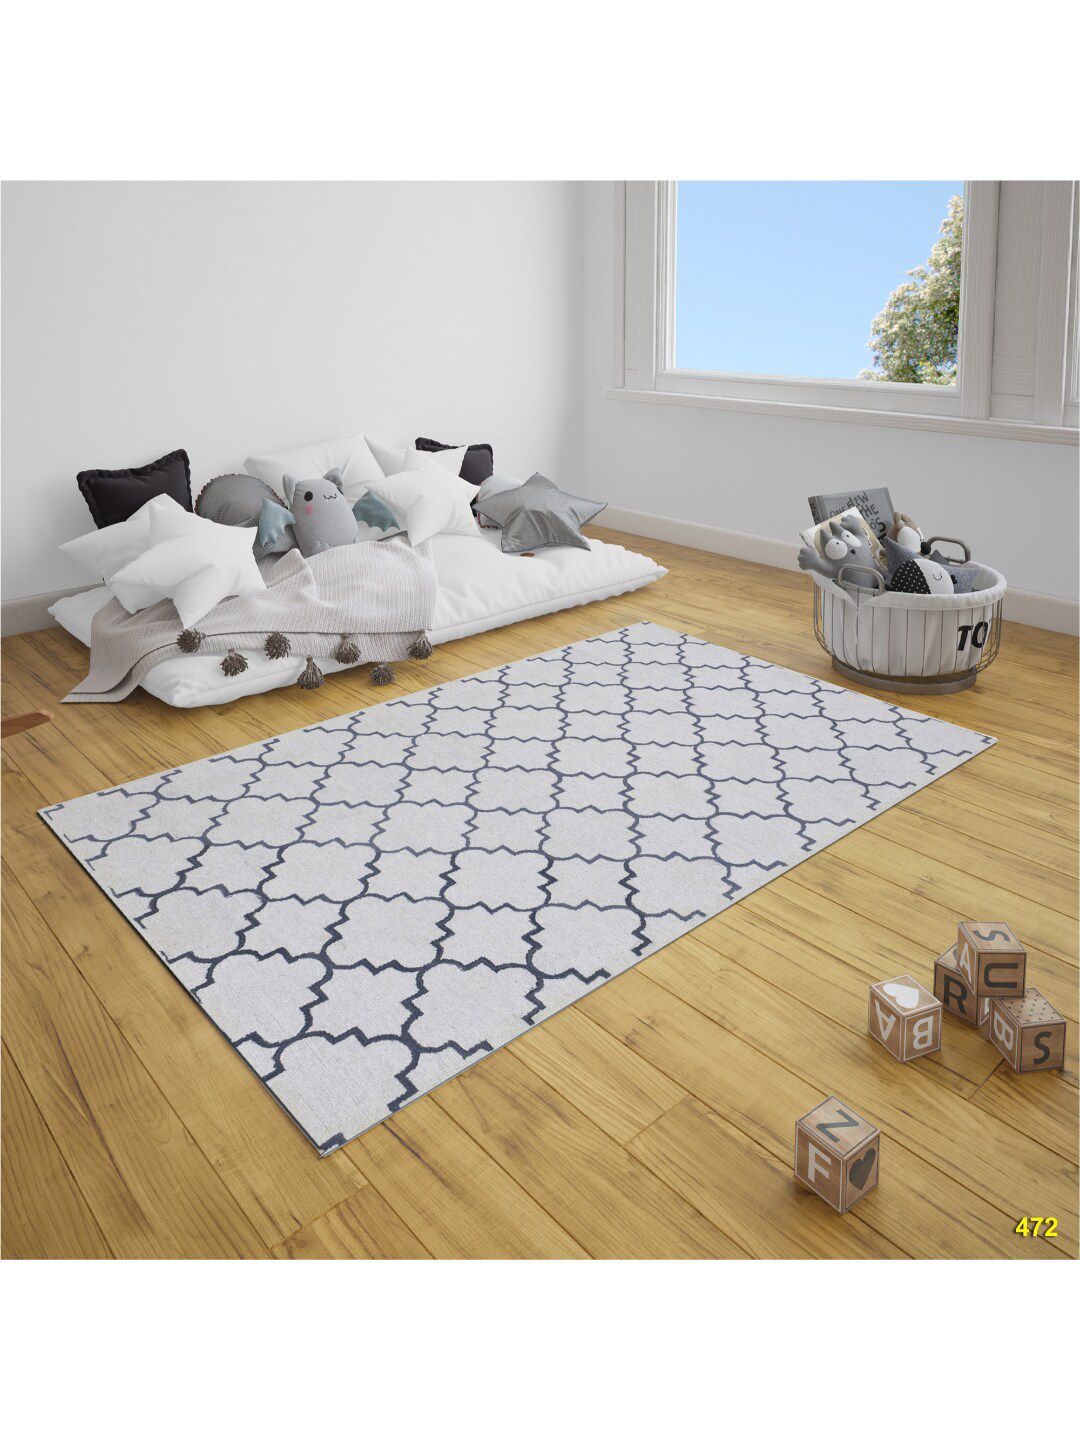 SANDED EDGE Ivory & Grey Hand Tufted Woolen Floor Carpet Price in India